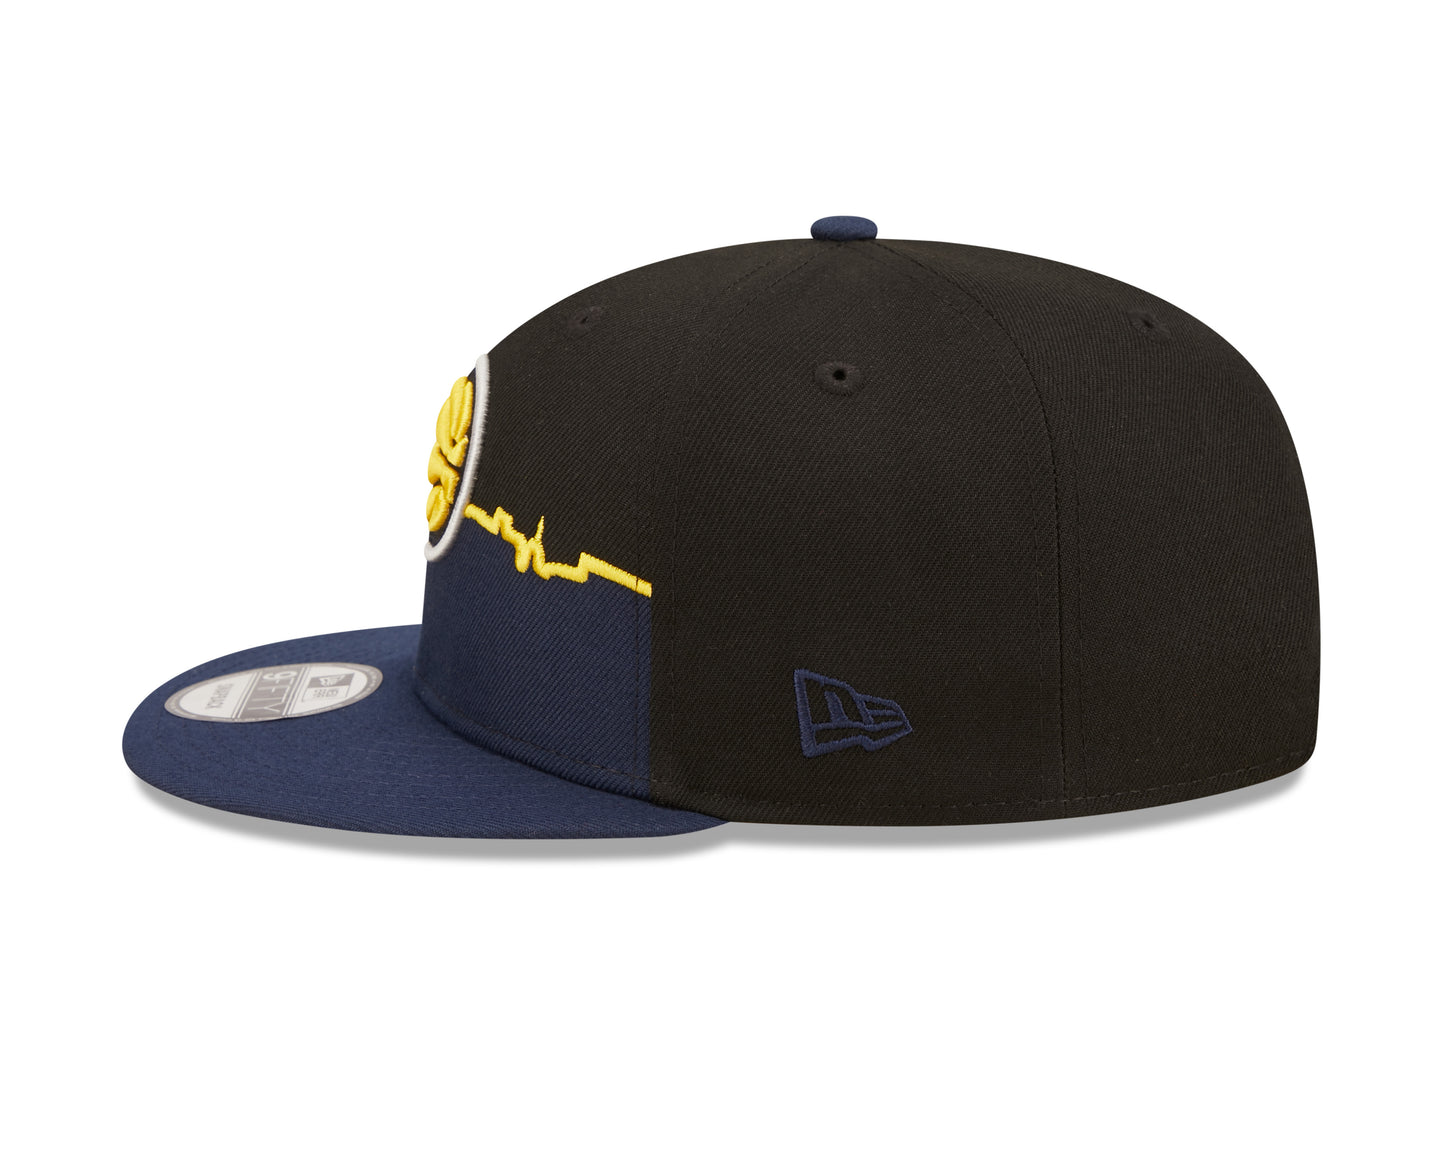 Indiana Pacers New Era Tip-Off 9FIFTY Snap Back Hat - Navy/Black